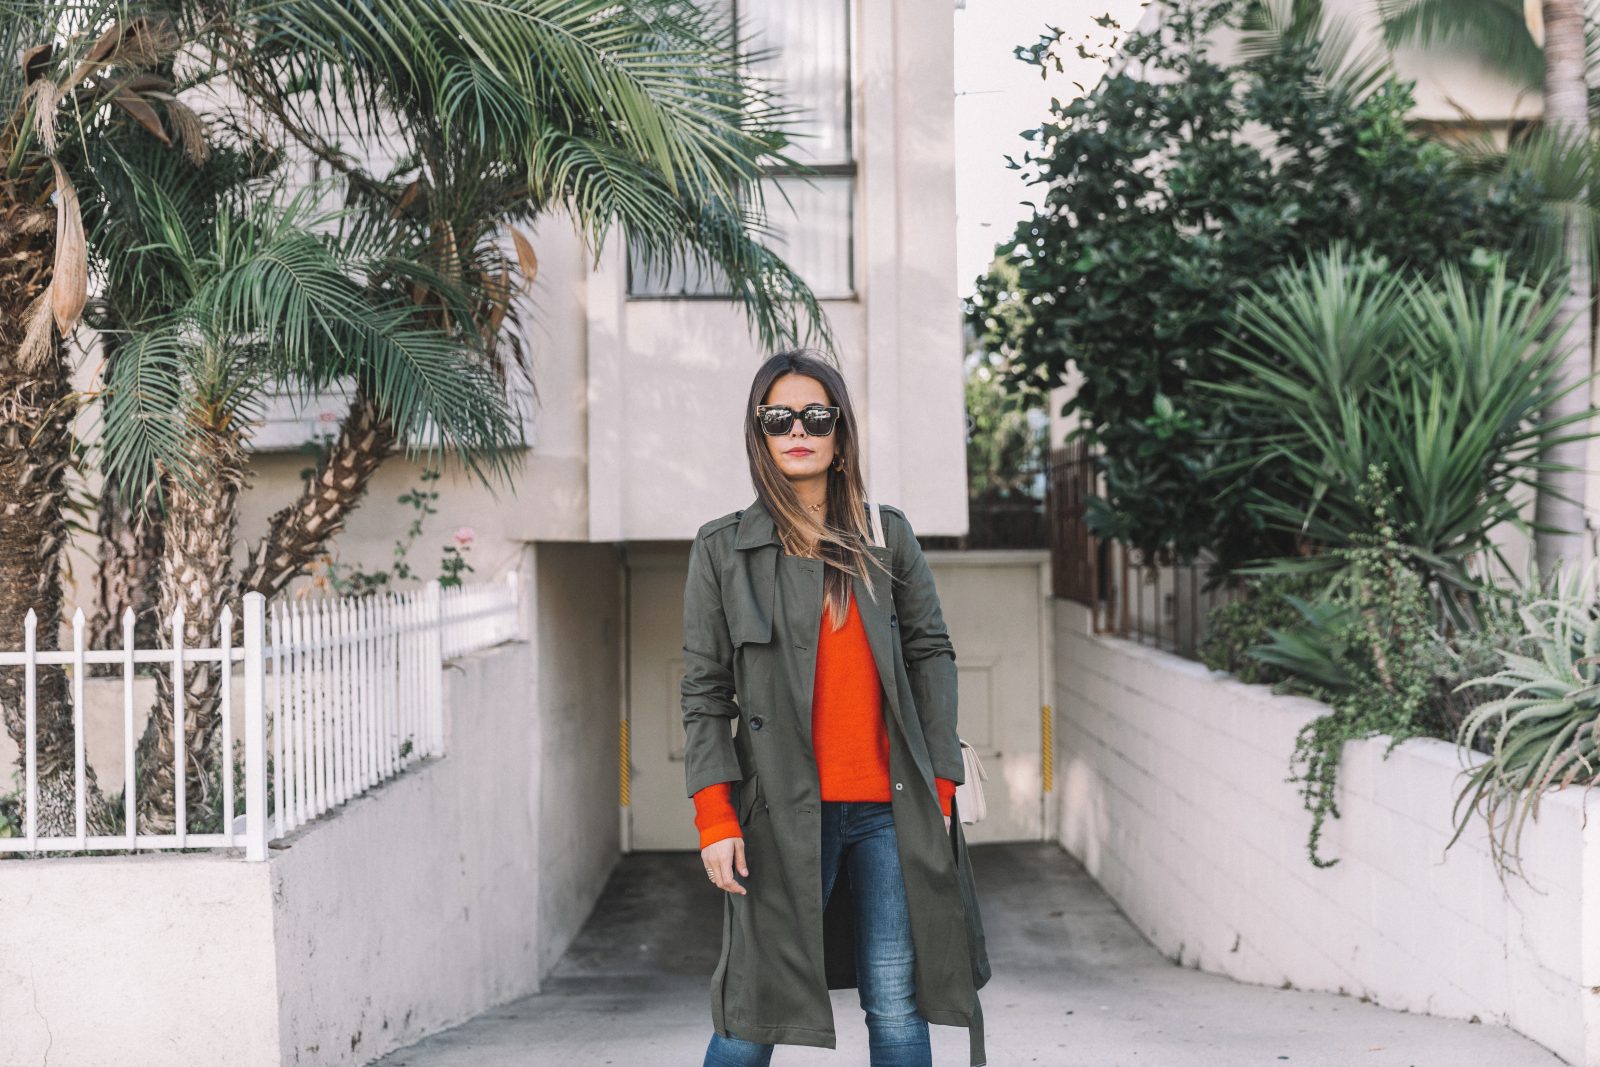 calvin_klein_outfit-ck_sculpted_jeans-denim-trench-orange_sweater-gold_shoes-celine_box_bag-outfit-street_style-los_angeles-collage_vintage